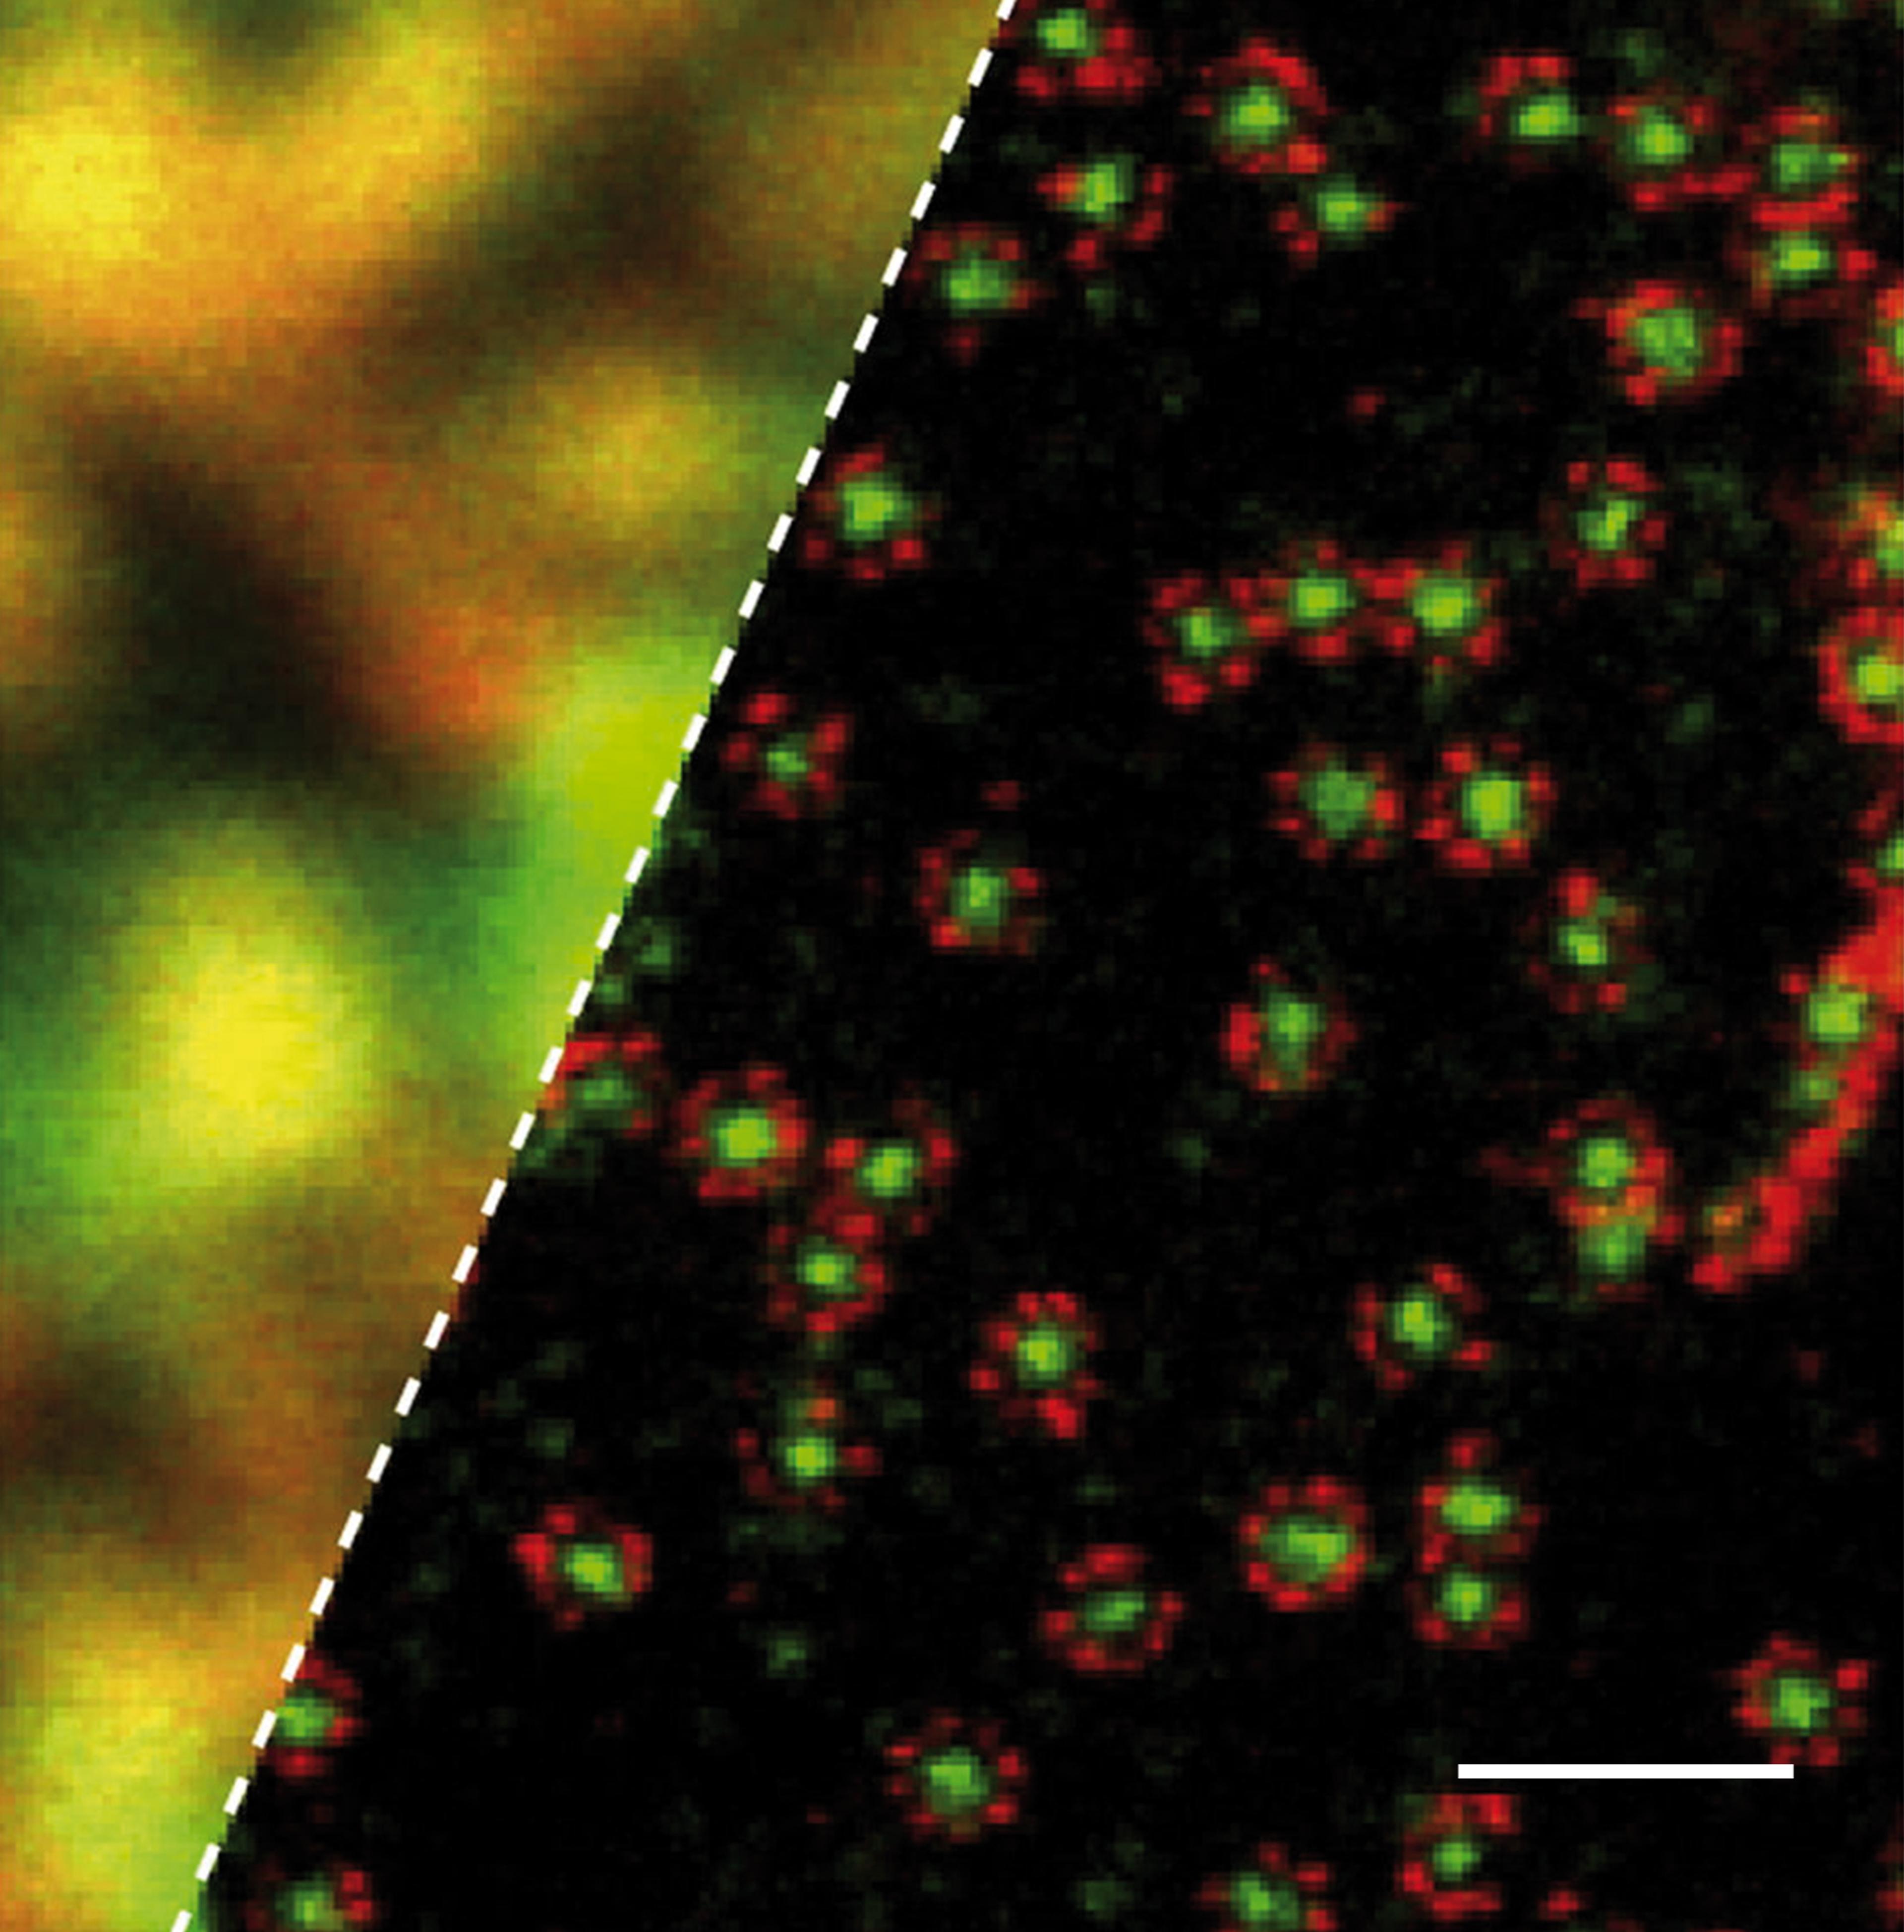 STED microscopy image of protein complexes